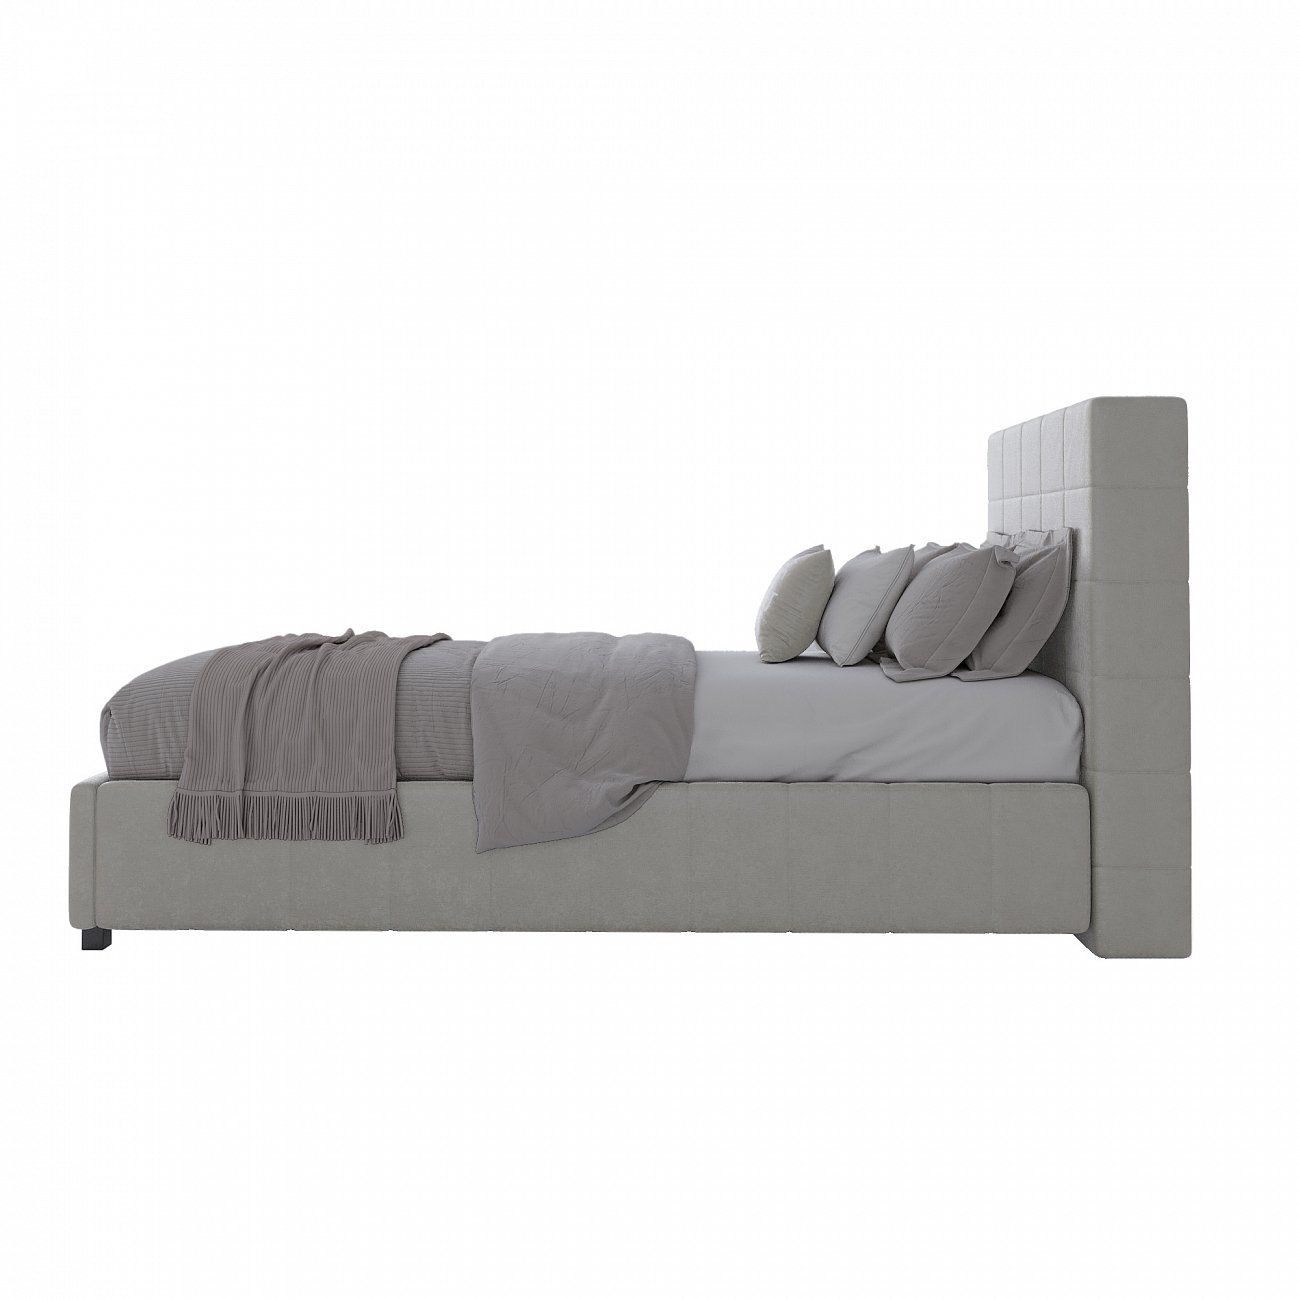 Single bed with upholstered headboard 90x200 cm milk Shining Modern